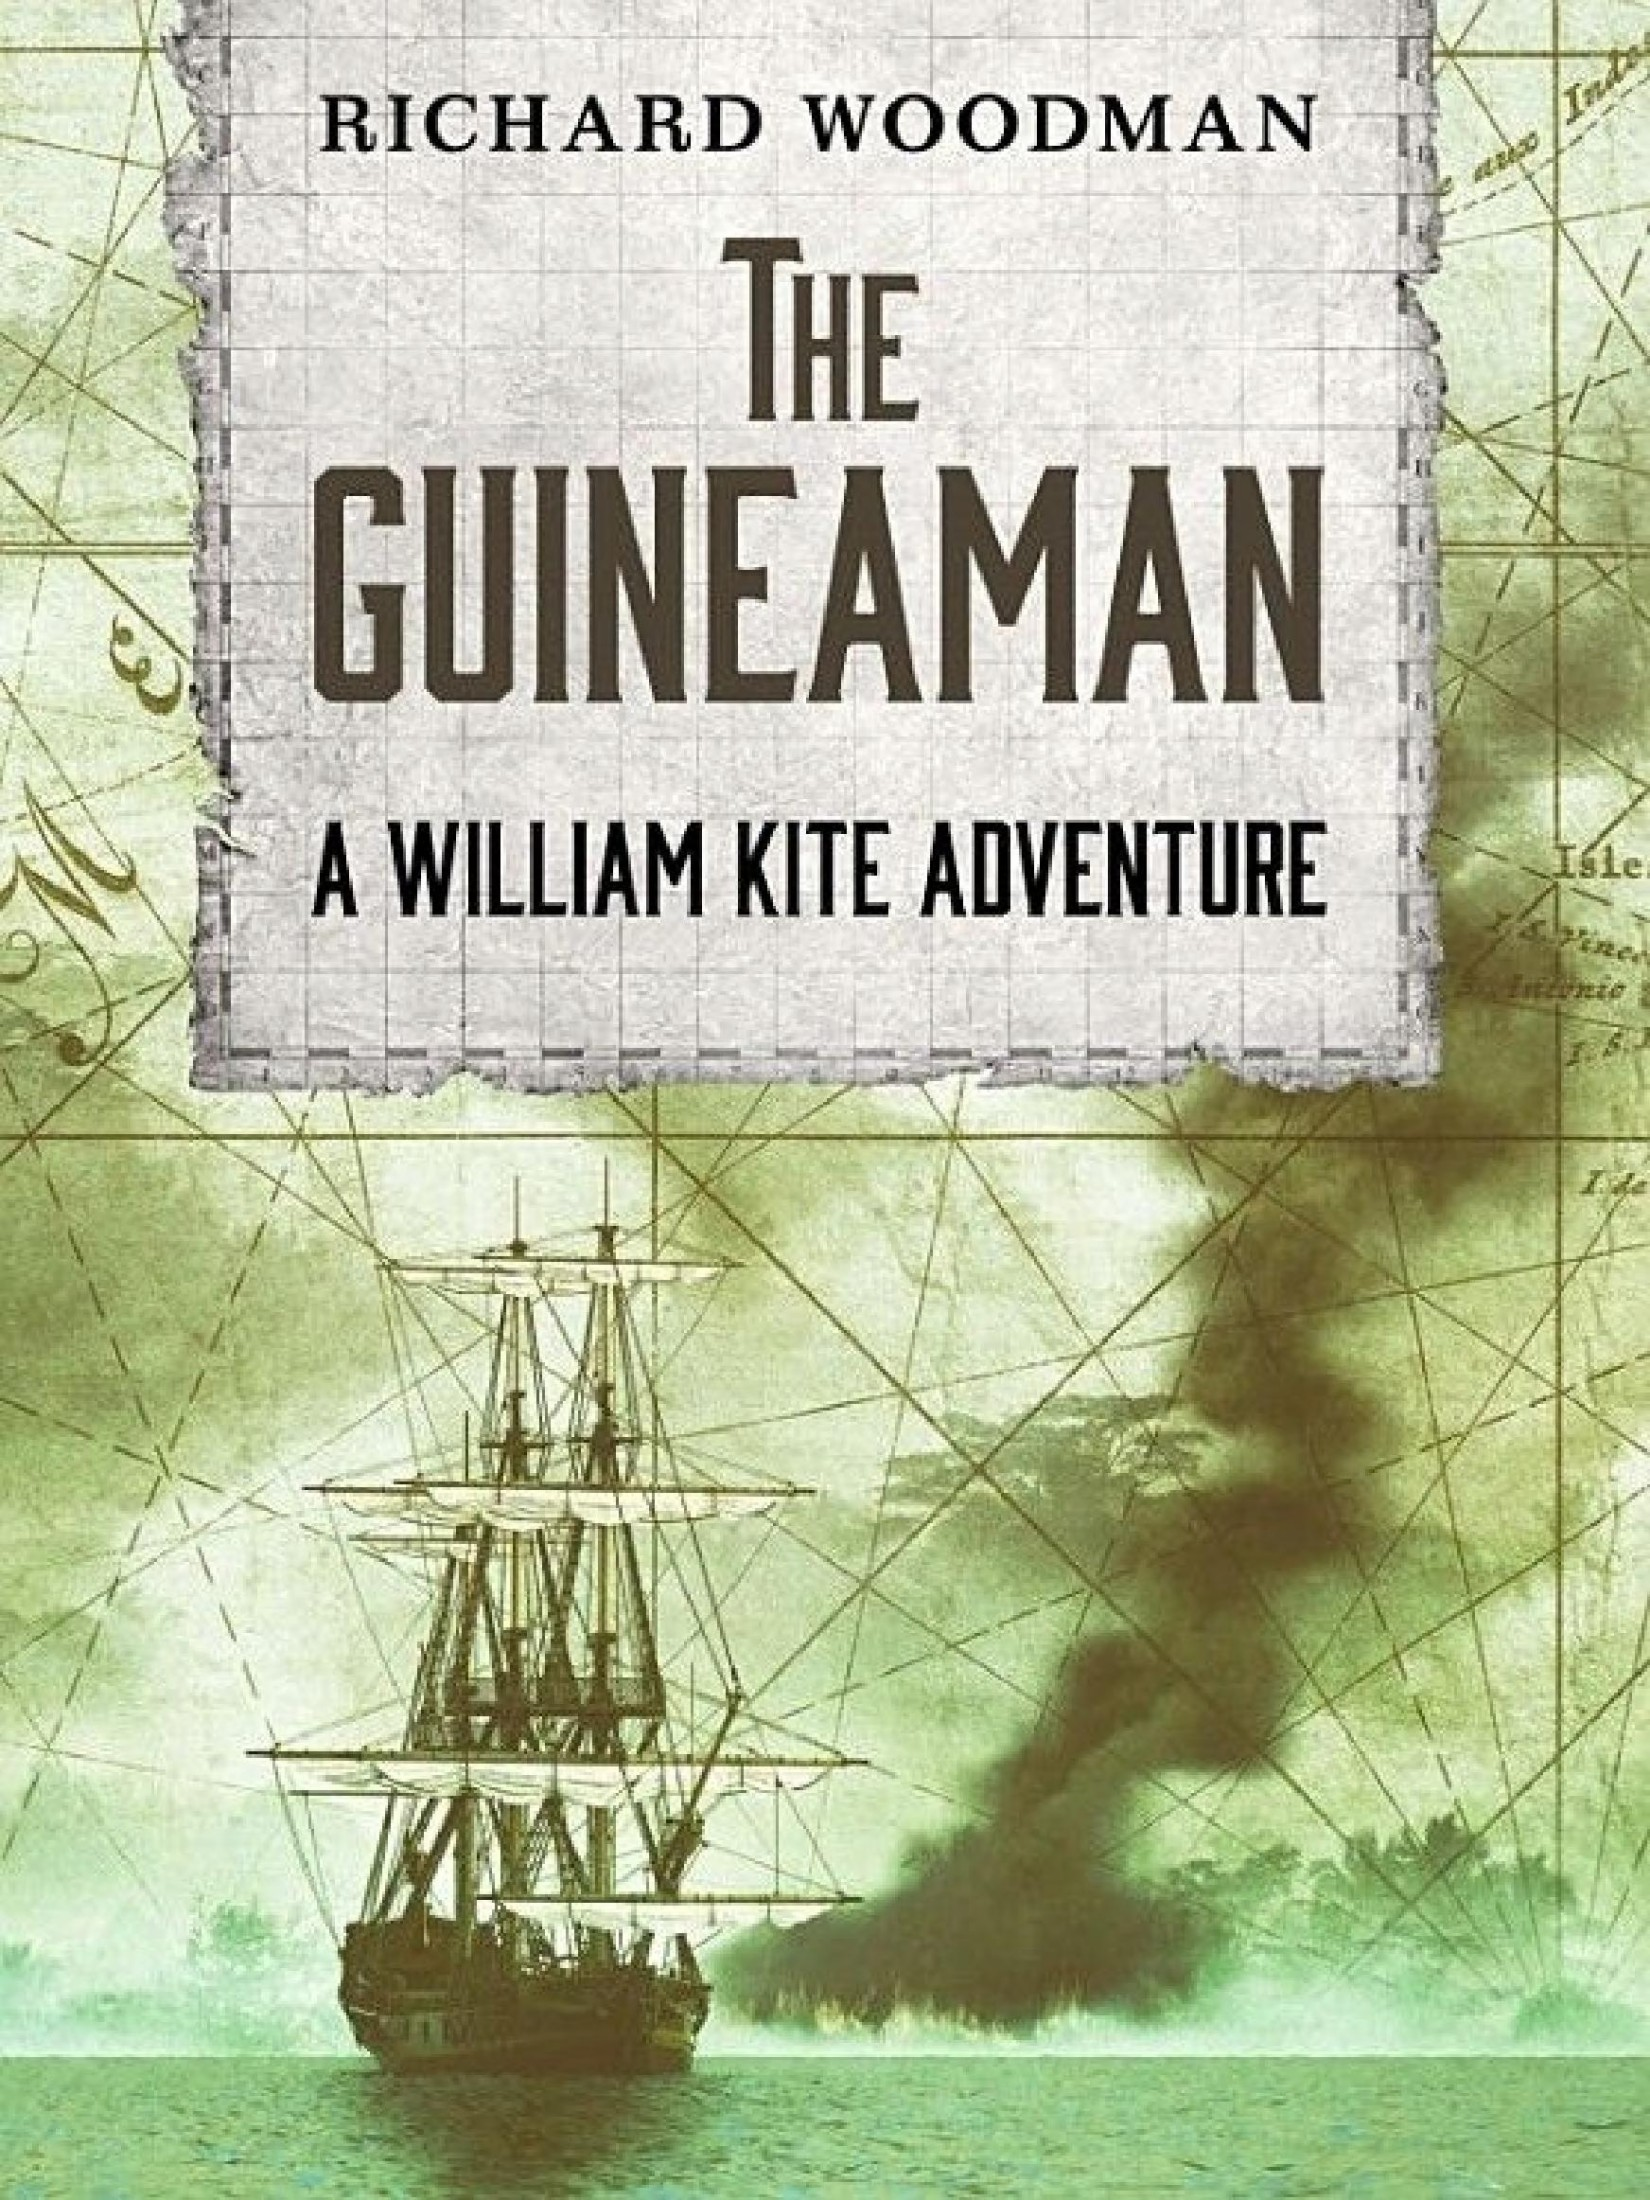 The Guineaman